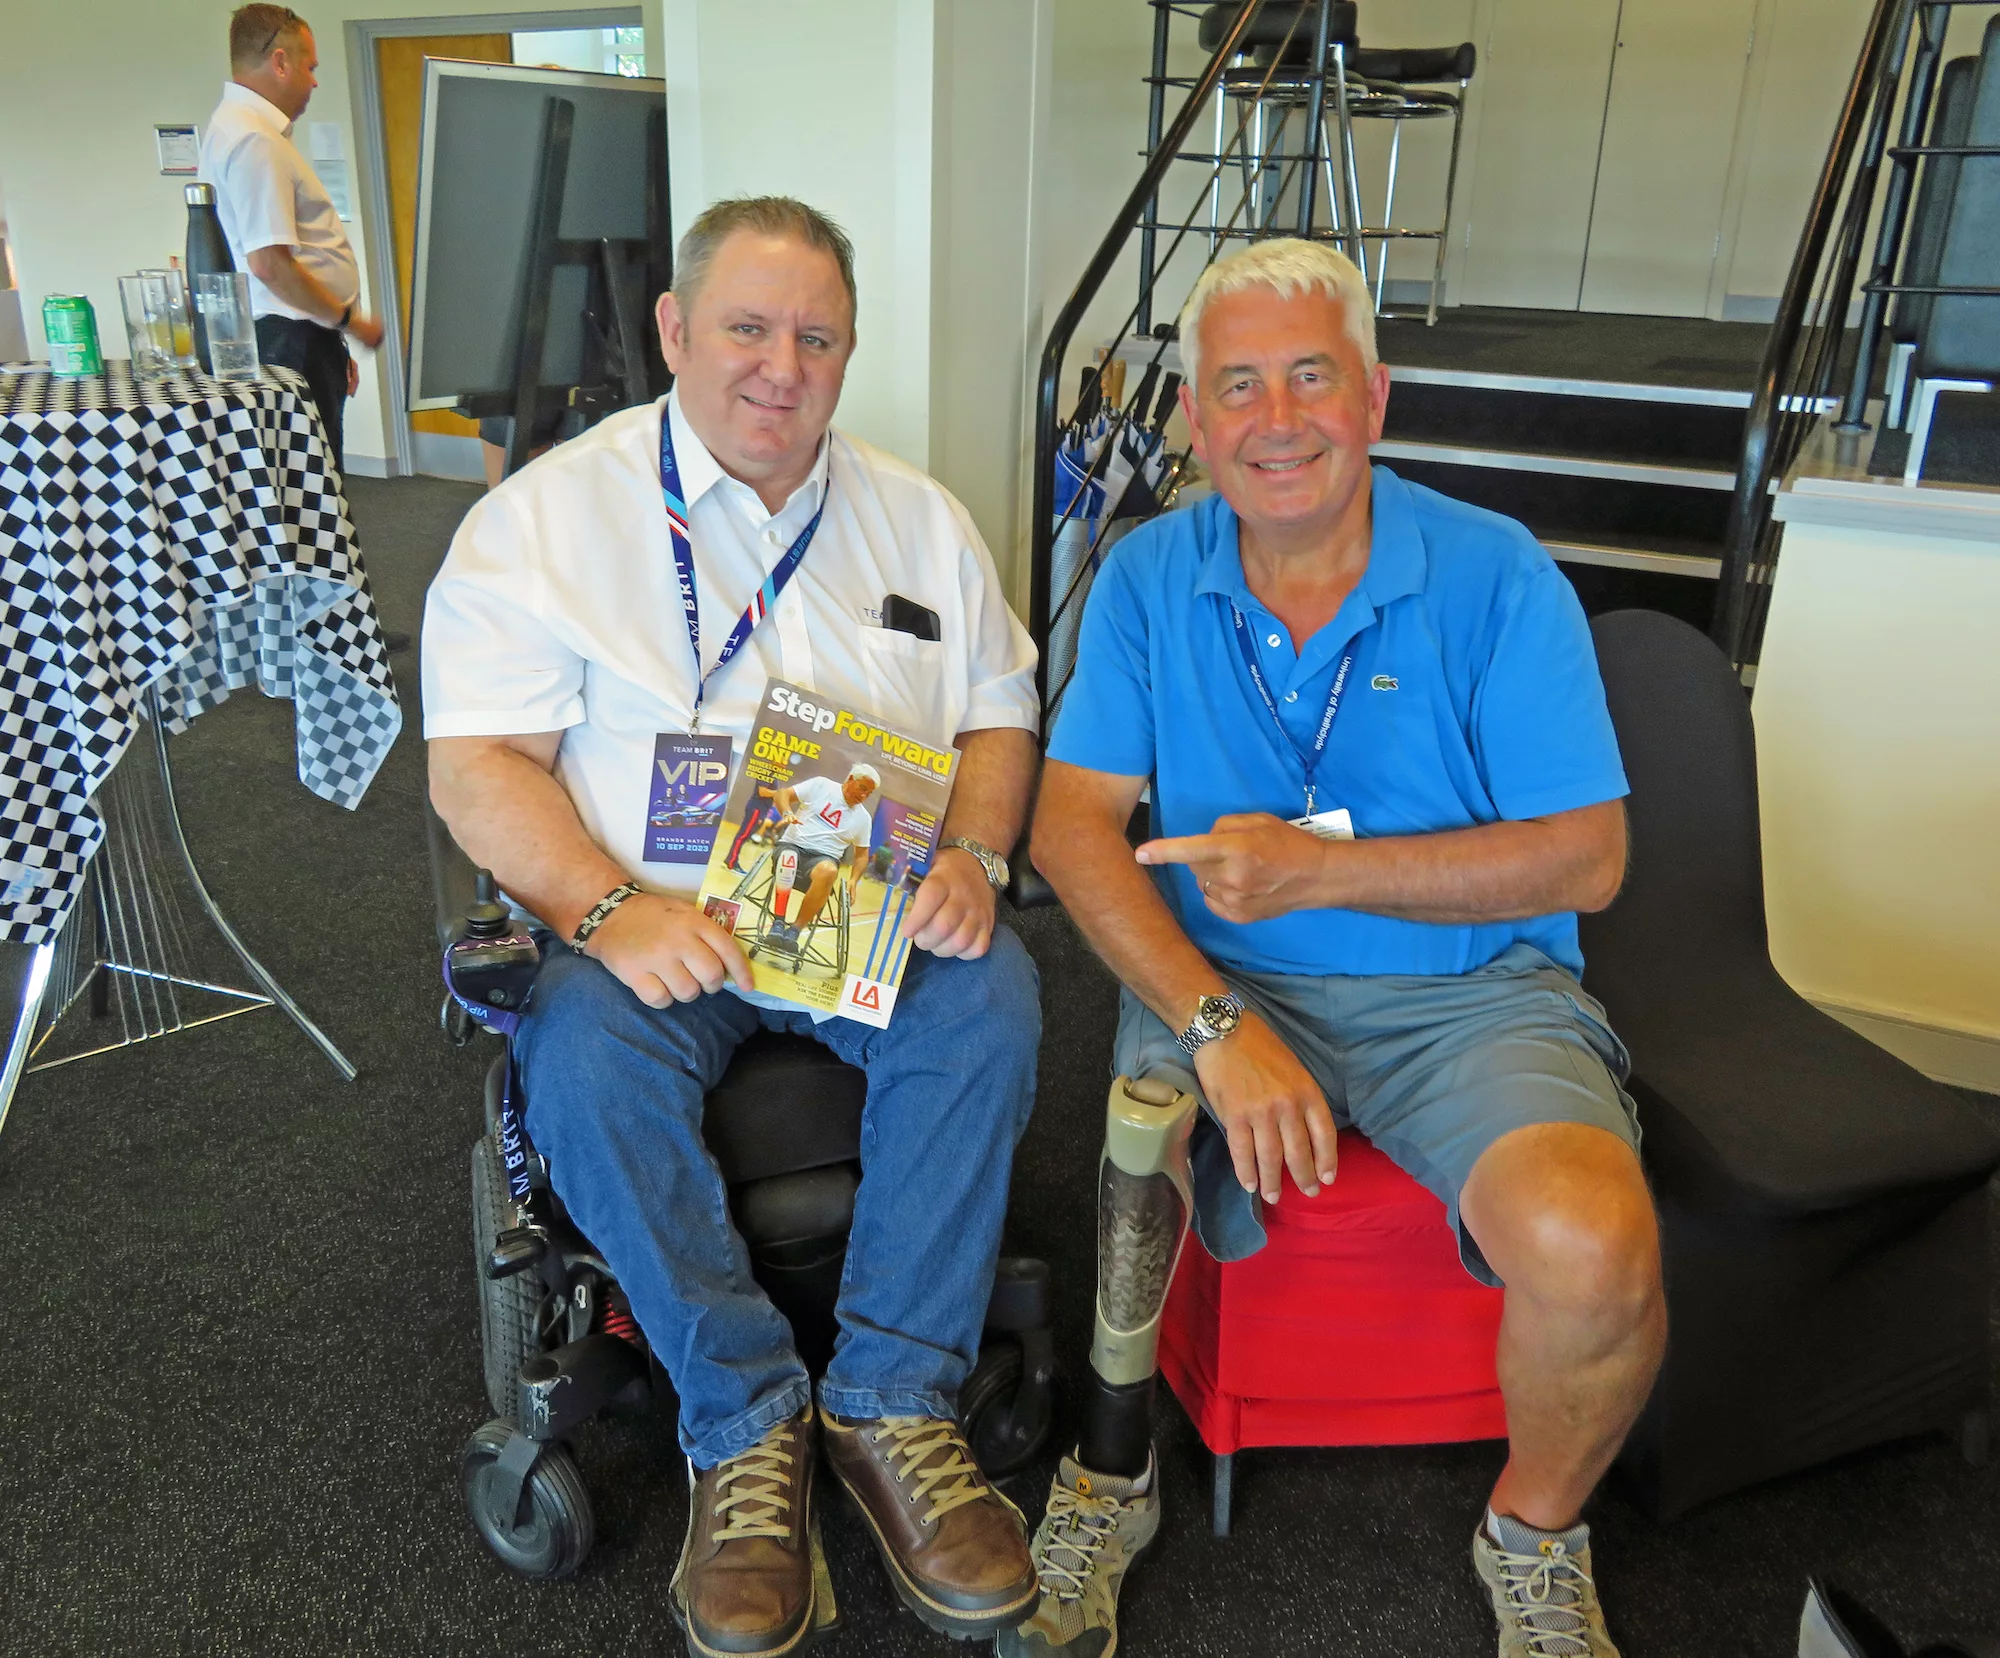 David Rose with Dave Player, the Team Principal of Team Brit.